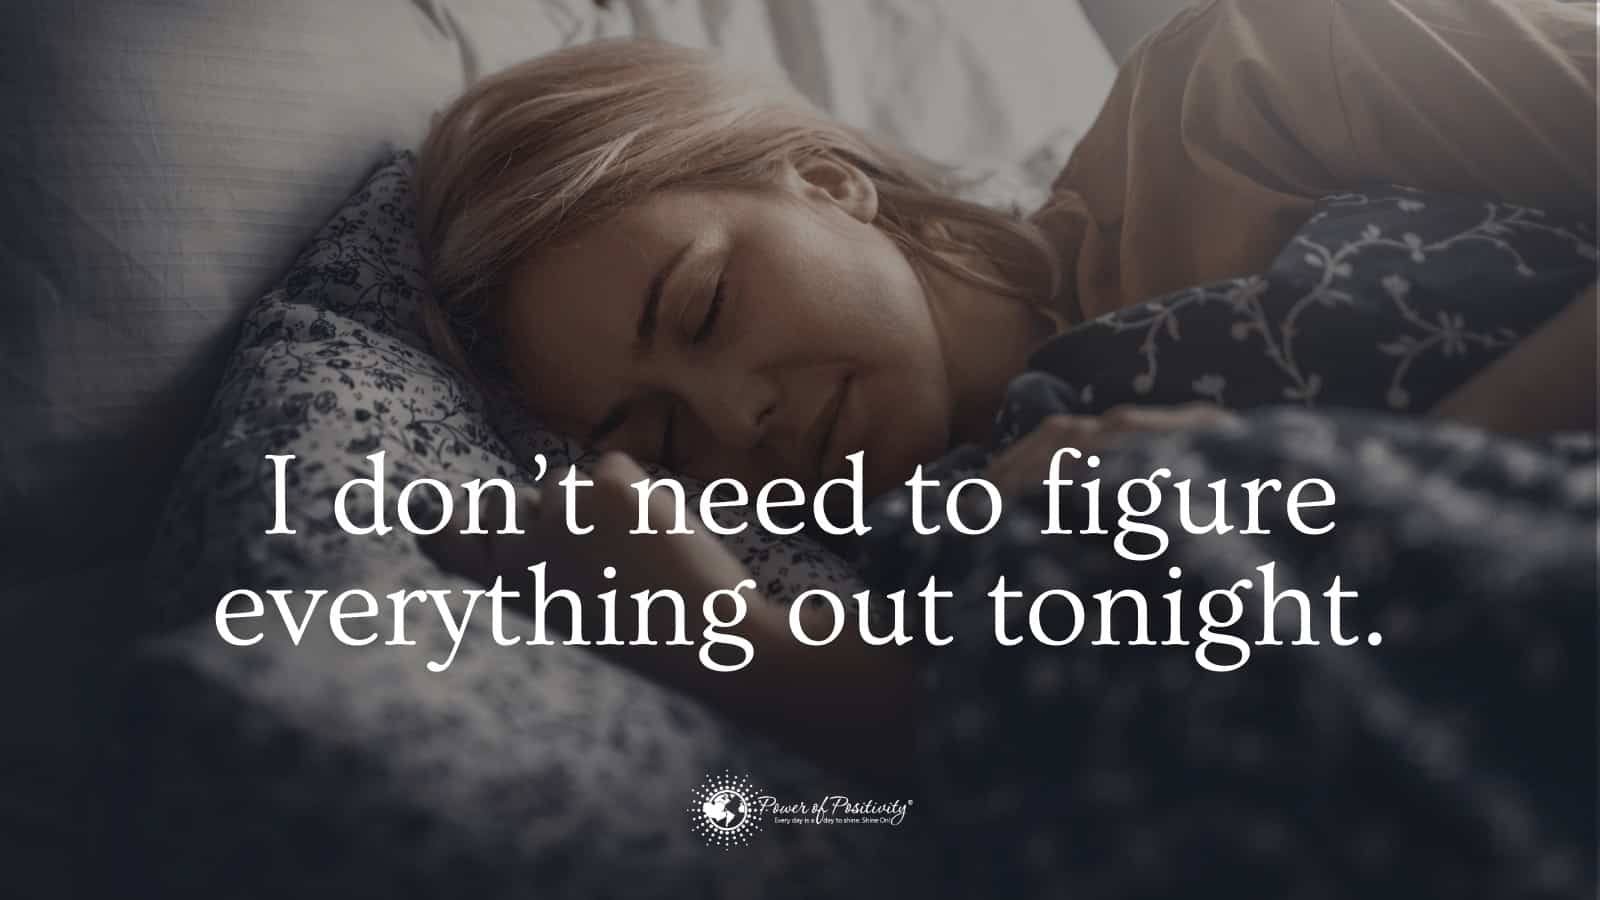 15 Self-affirming Statements to Say at Bedtime to Calm Your Mind